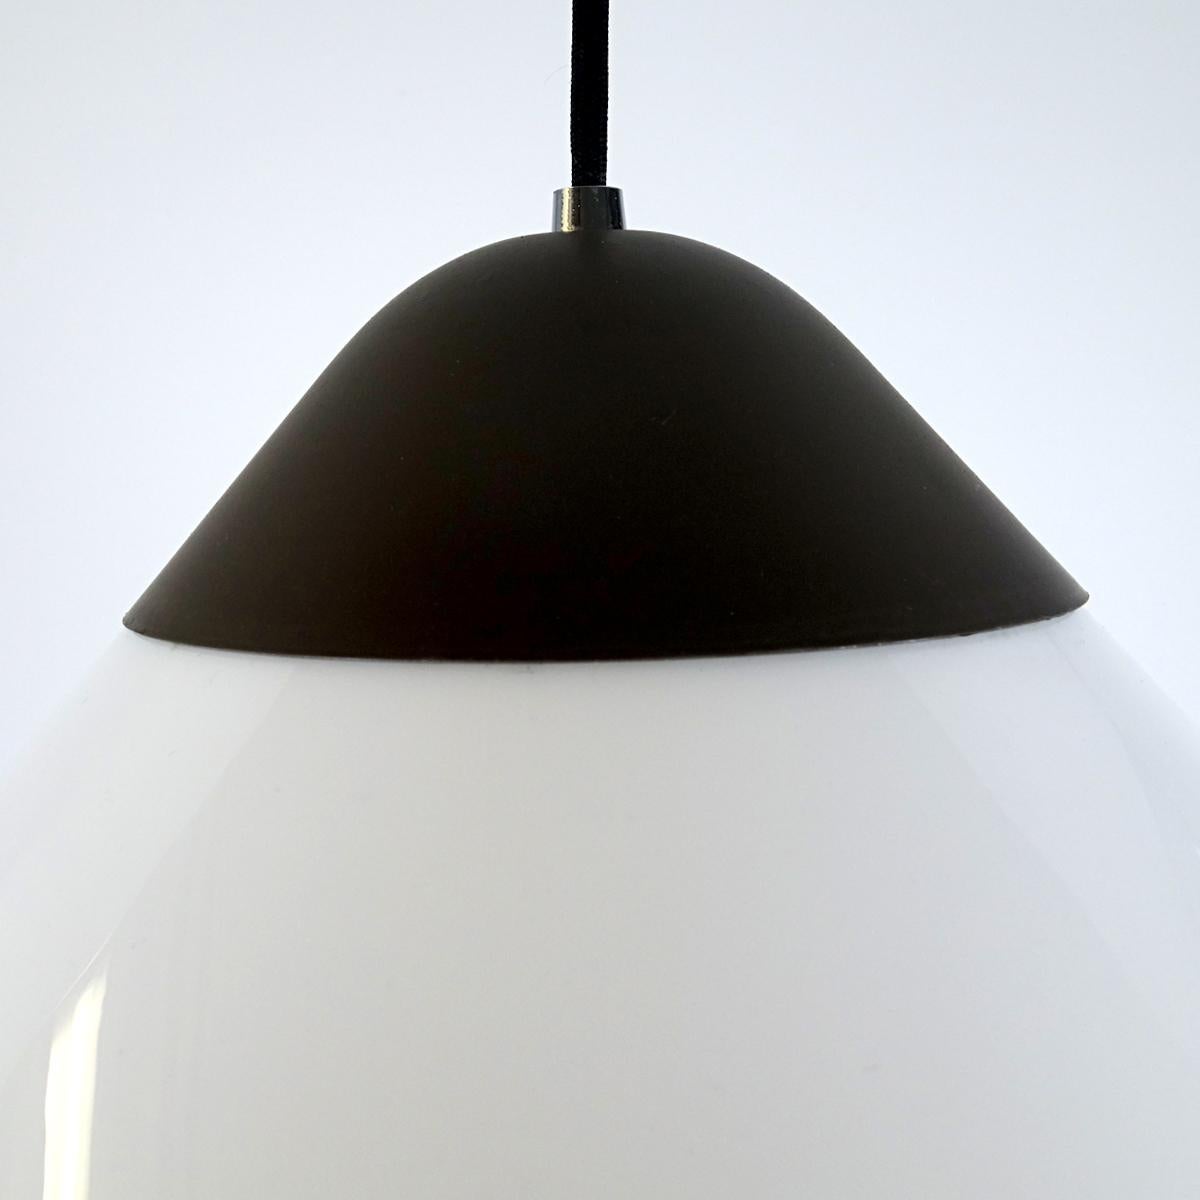 Large version of the Opala pendant that Hans J. Wegner originally designed for a Copenhagen hotel.
The shade is made of white acrylic held by dark grey steel.
Marked on in the inside by the Louis Pulsen label.